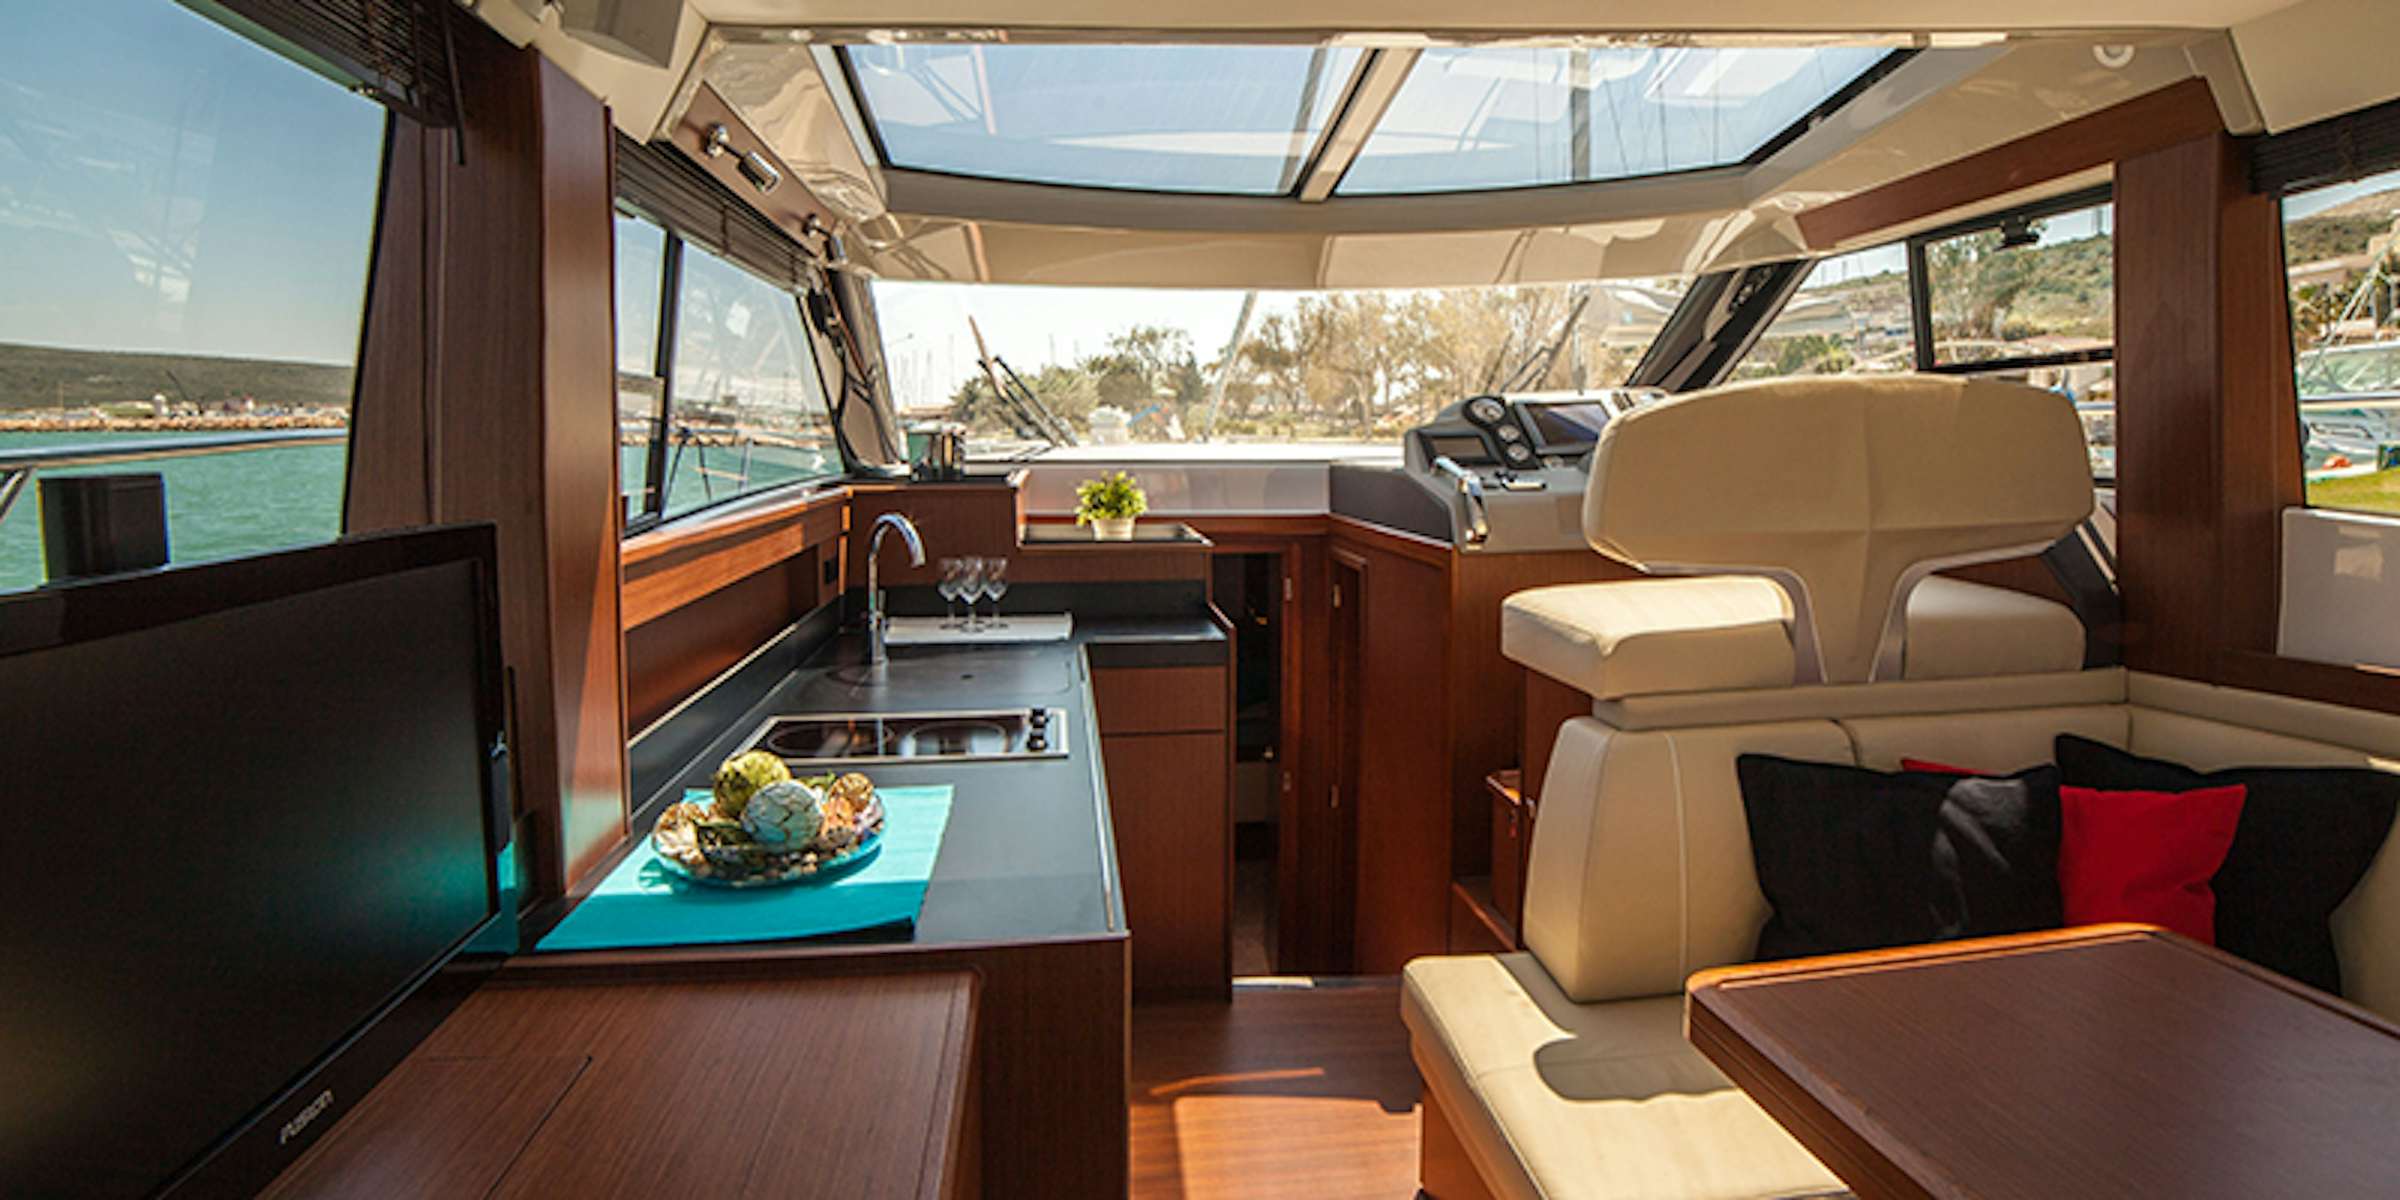 How to stay organised on your boat